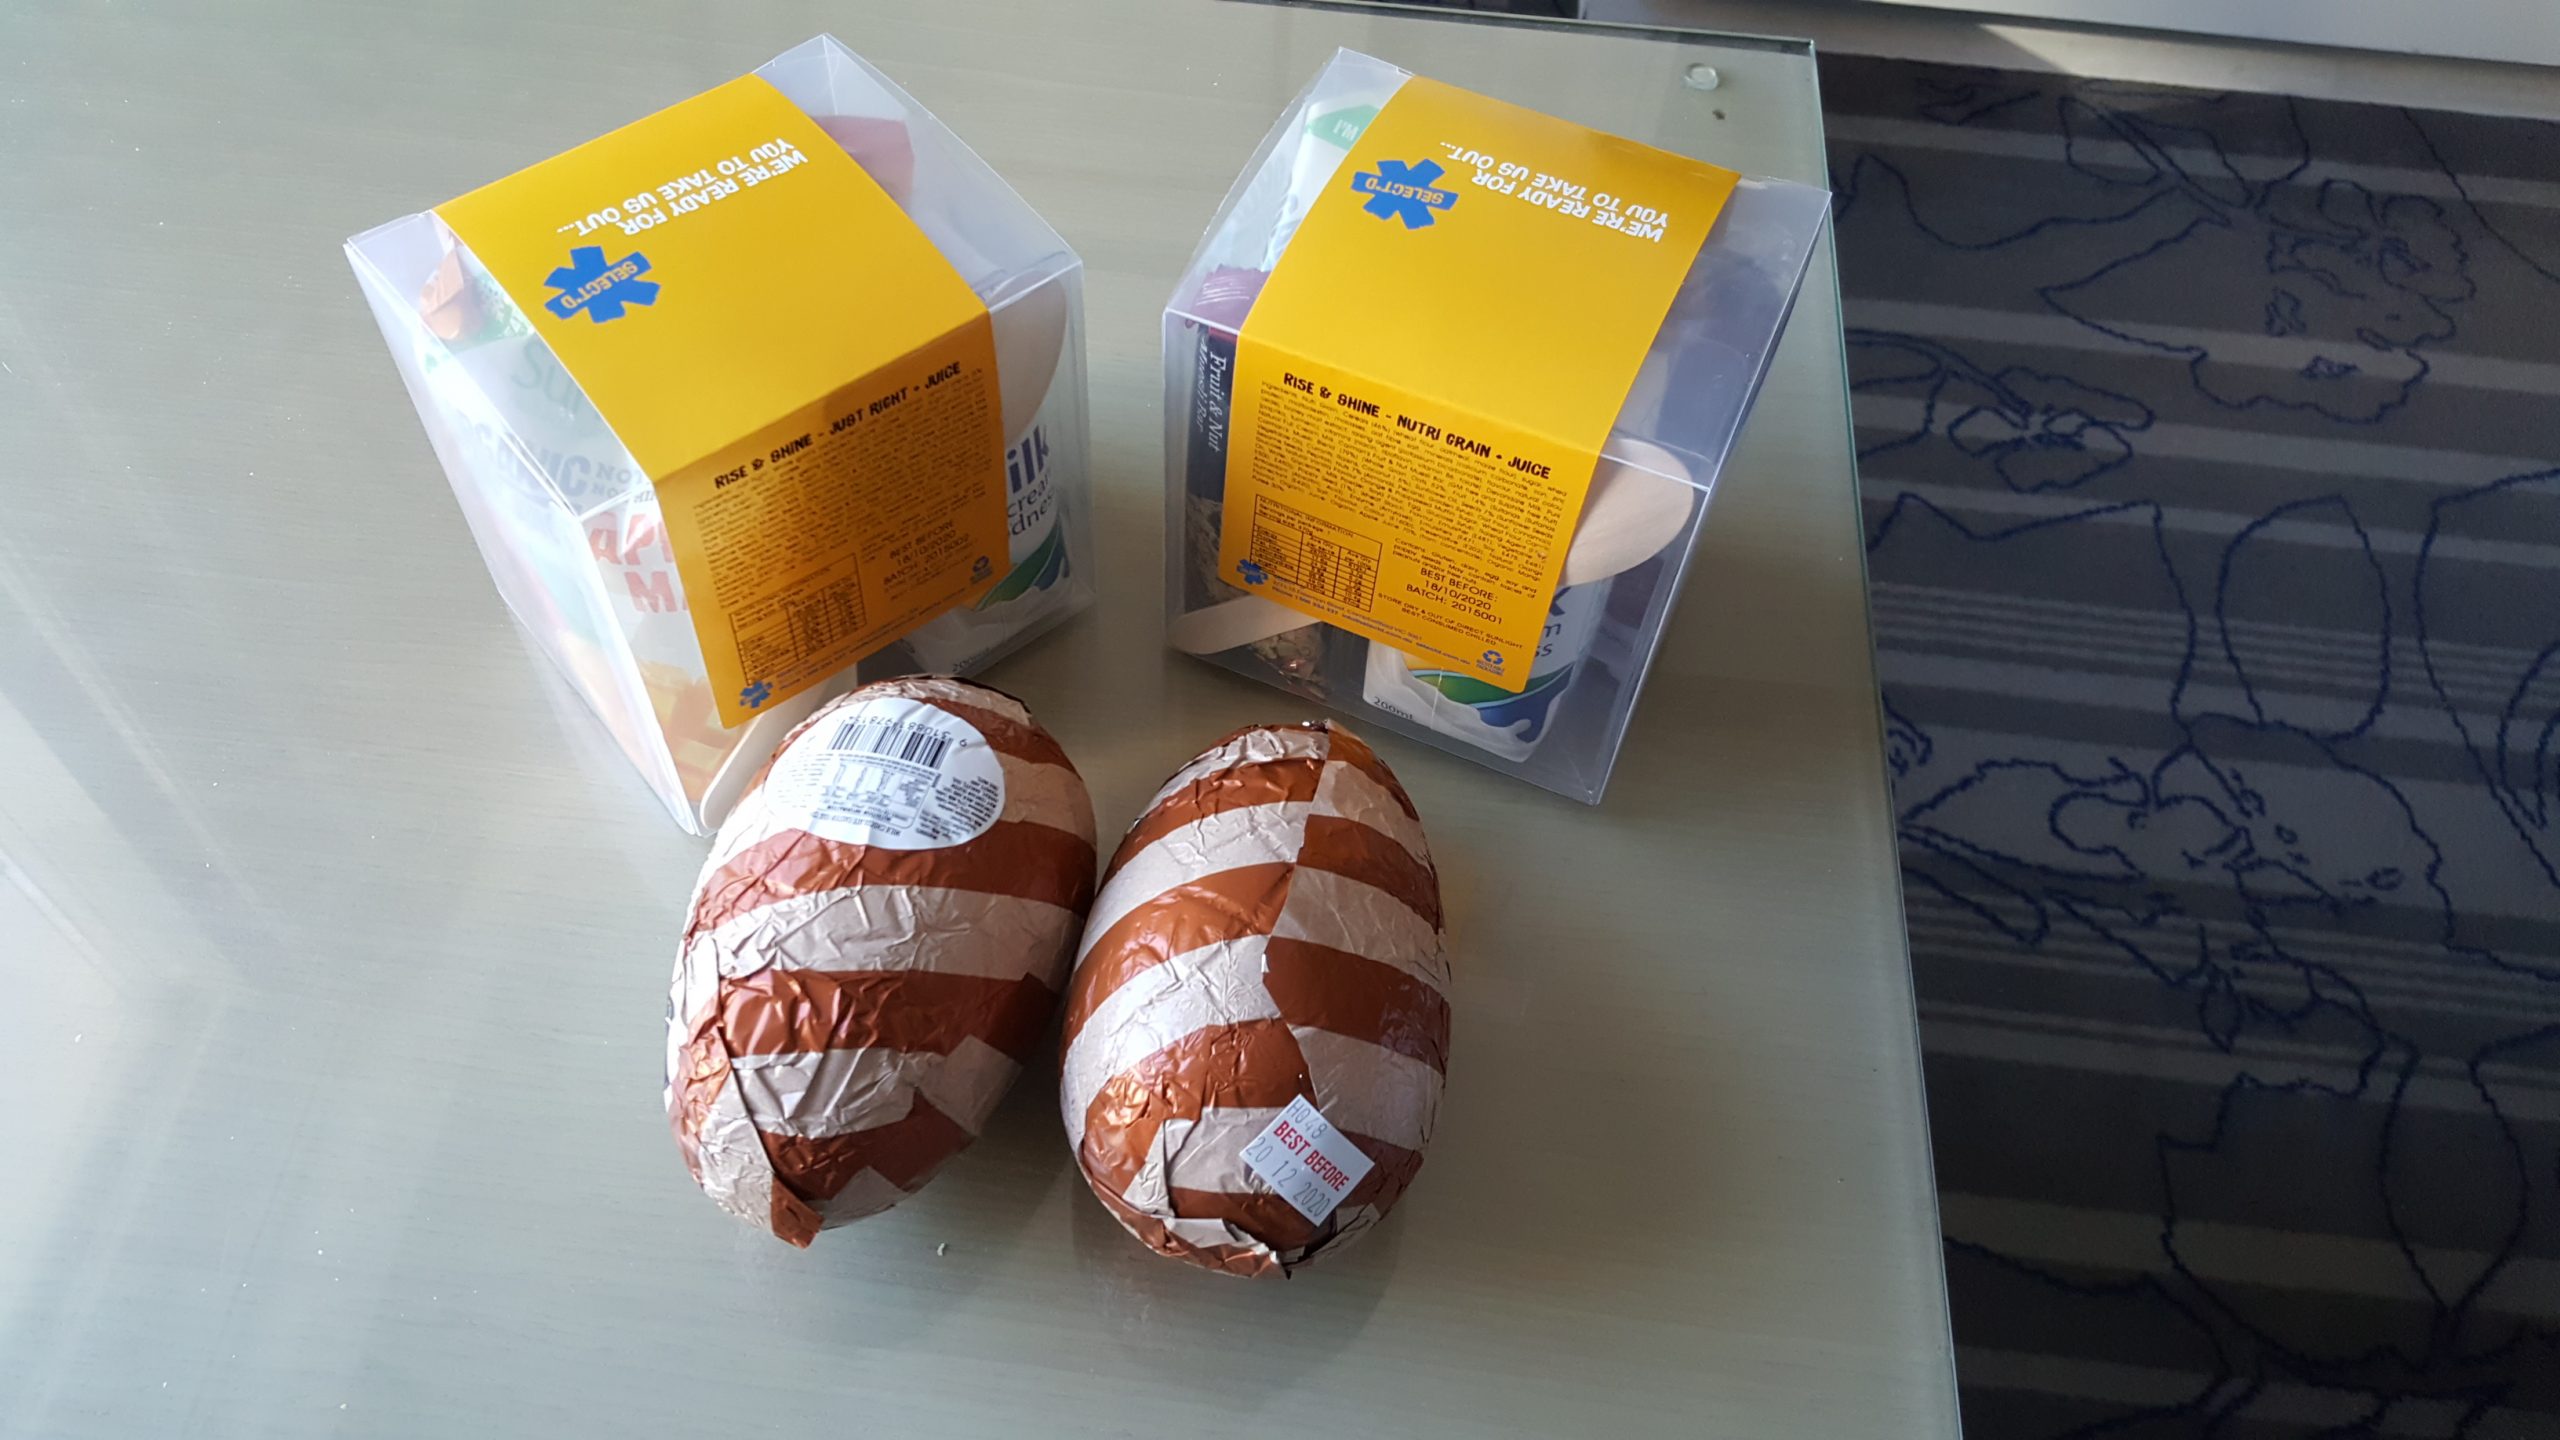 two Easter eggs with brown and white striped foil wrapping